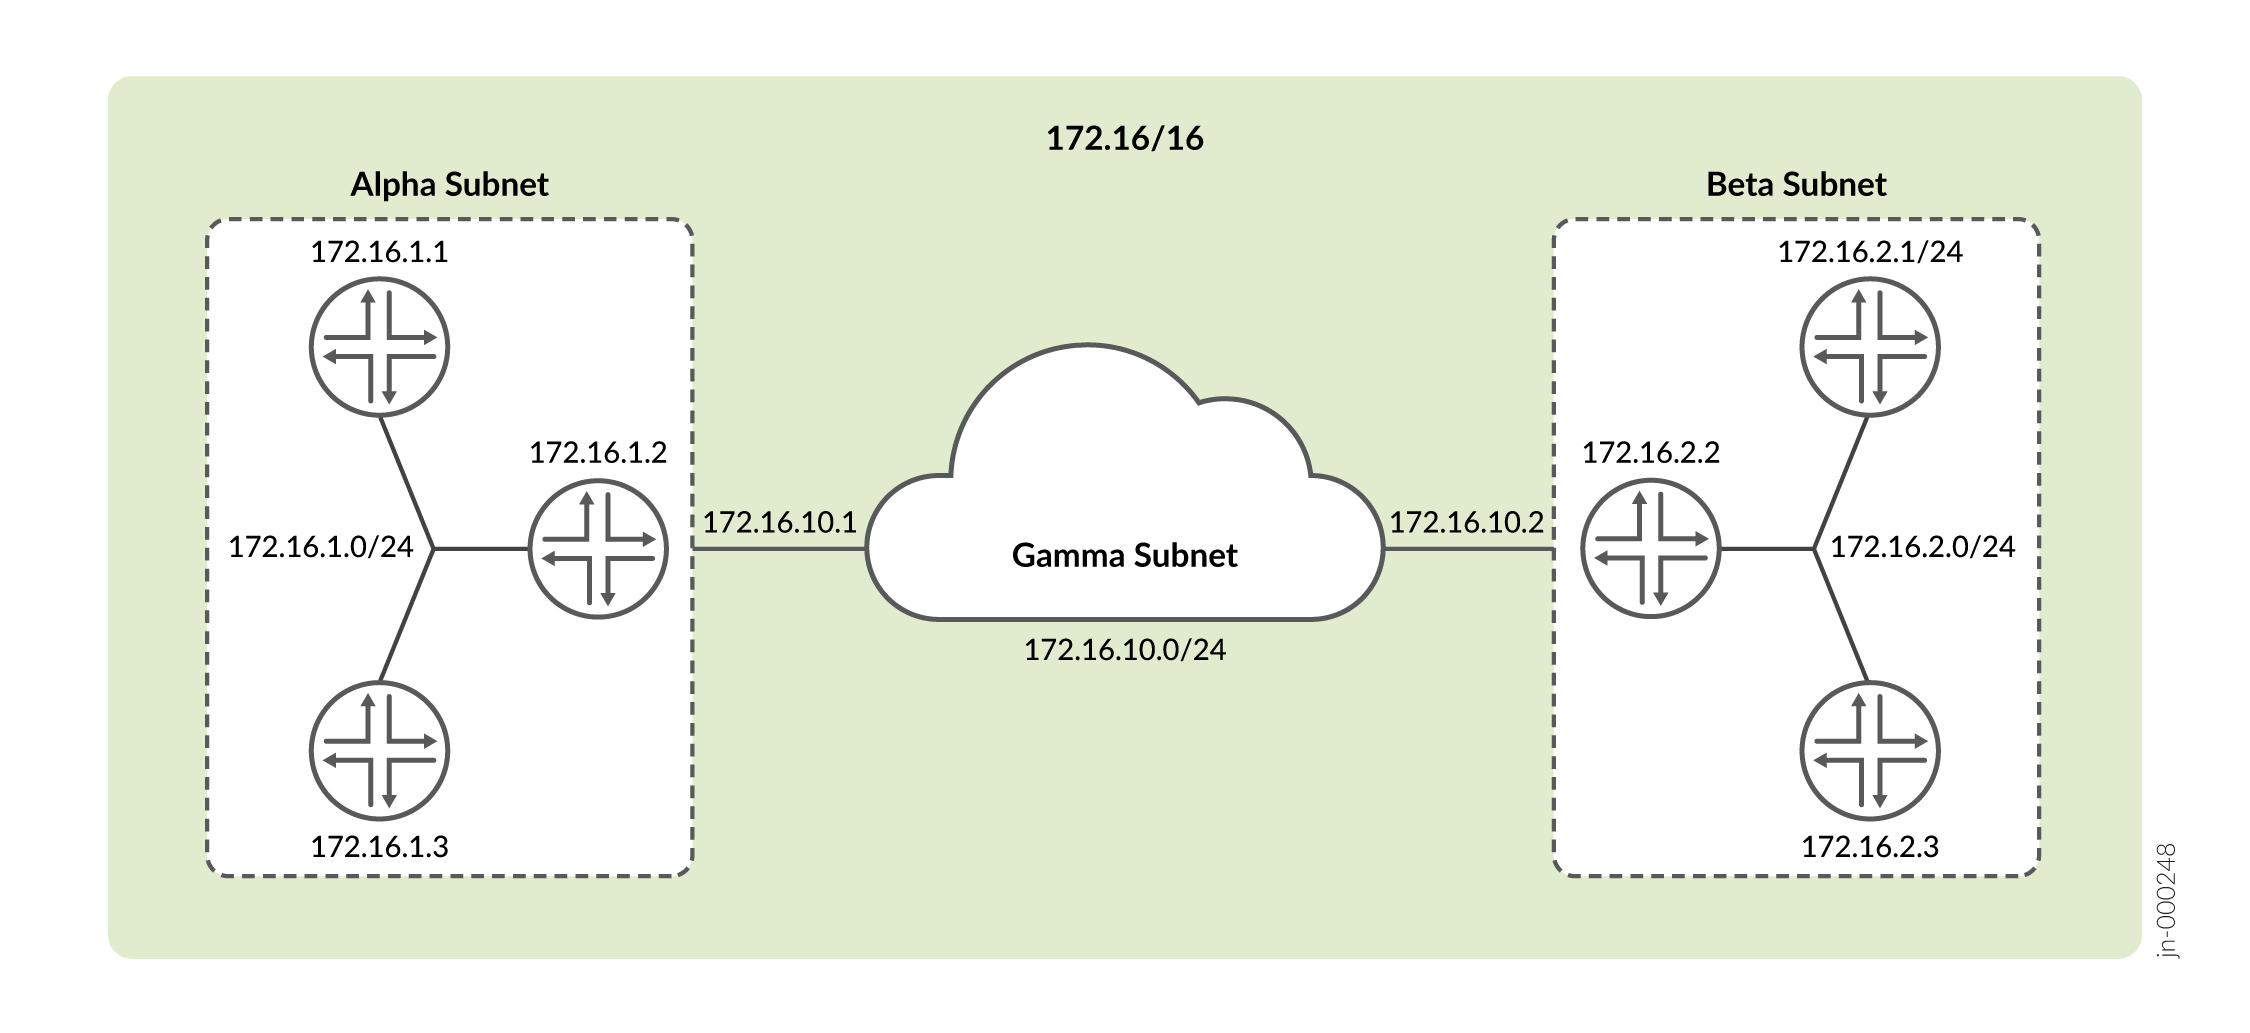 Subnets in a Network